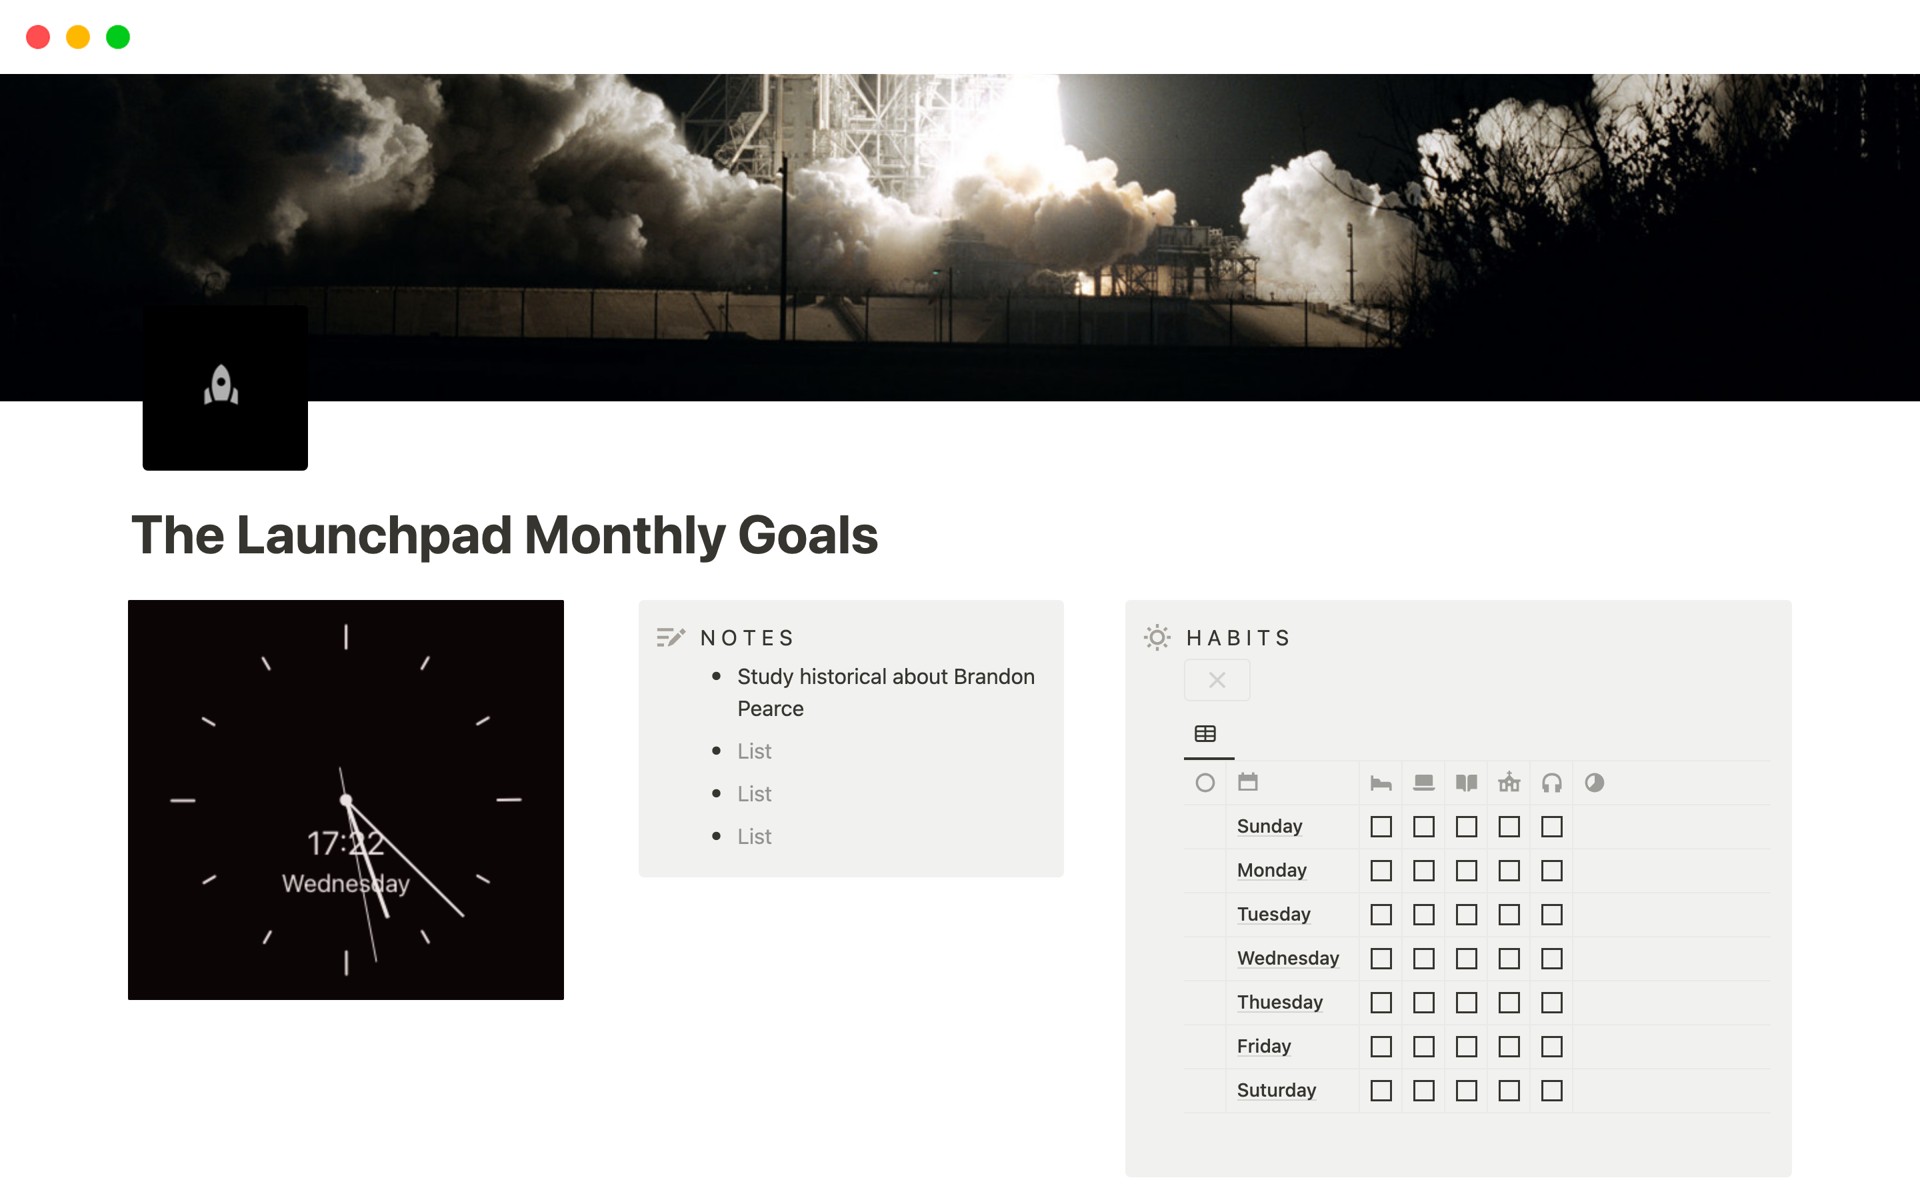 Manage you Goals properly

My goal is to help everyone to track their goals.